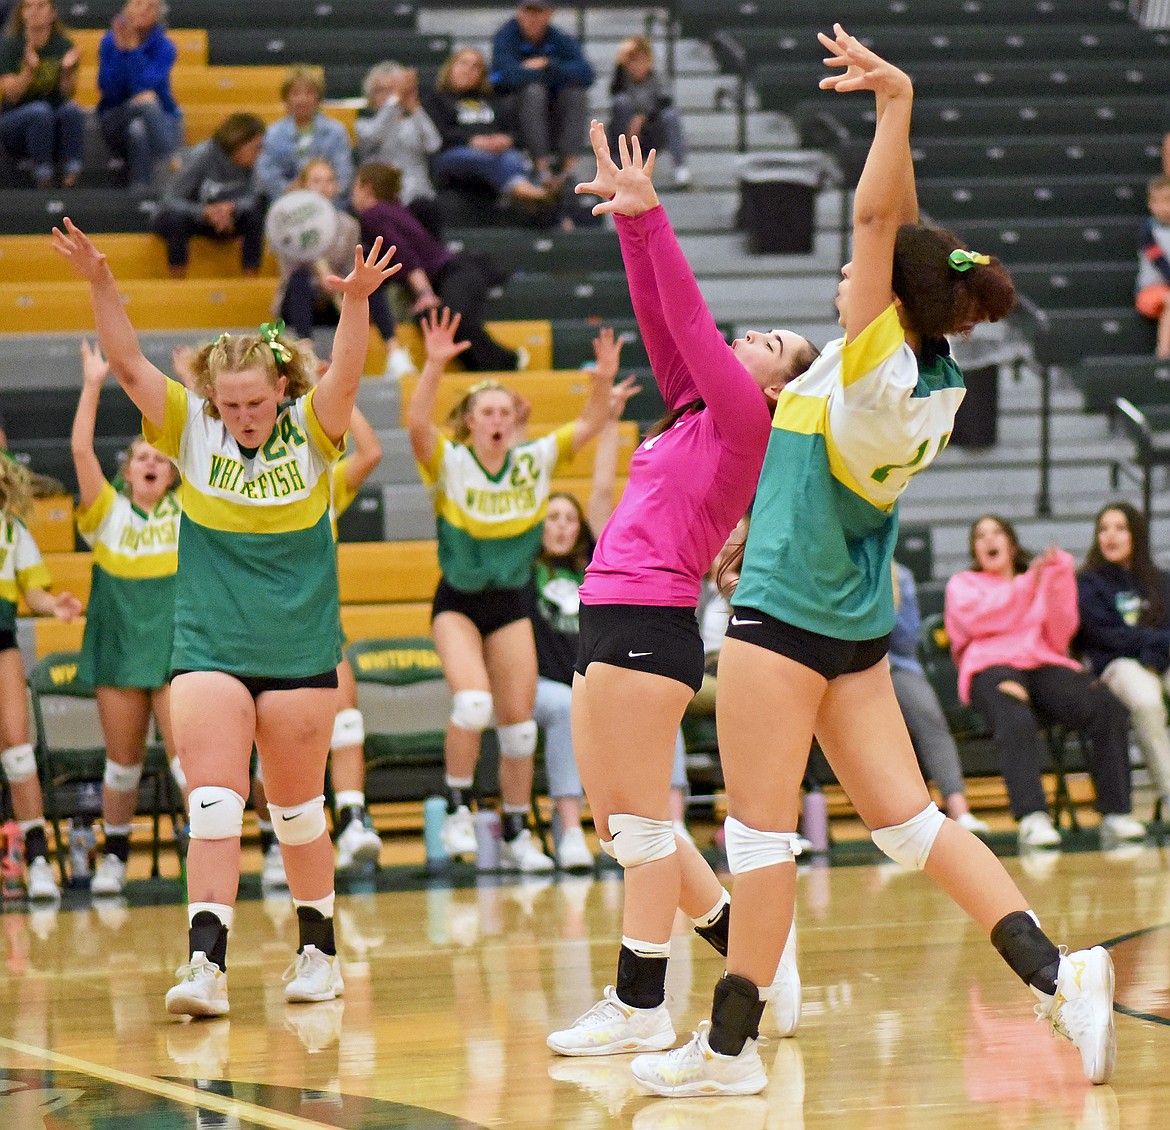 The Whitefish volleyball team celebrates a winning a point after a successful block at the net during a match against Browning on Tuesday, Sept. 28 in Whitefish. (Whitney England/Whitefish Pilot)